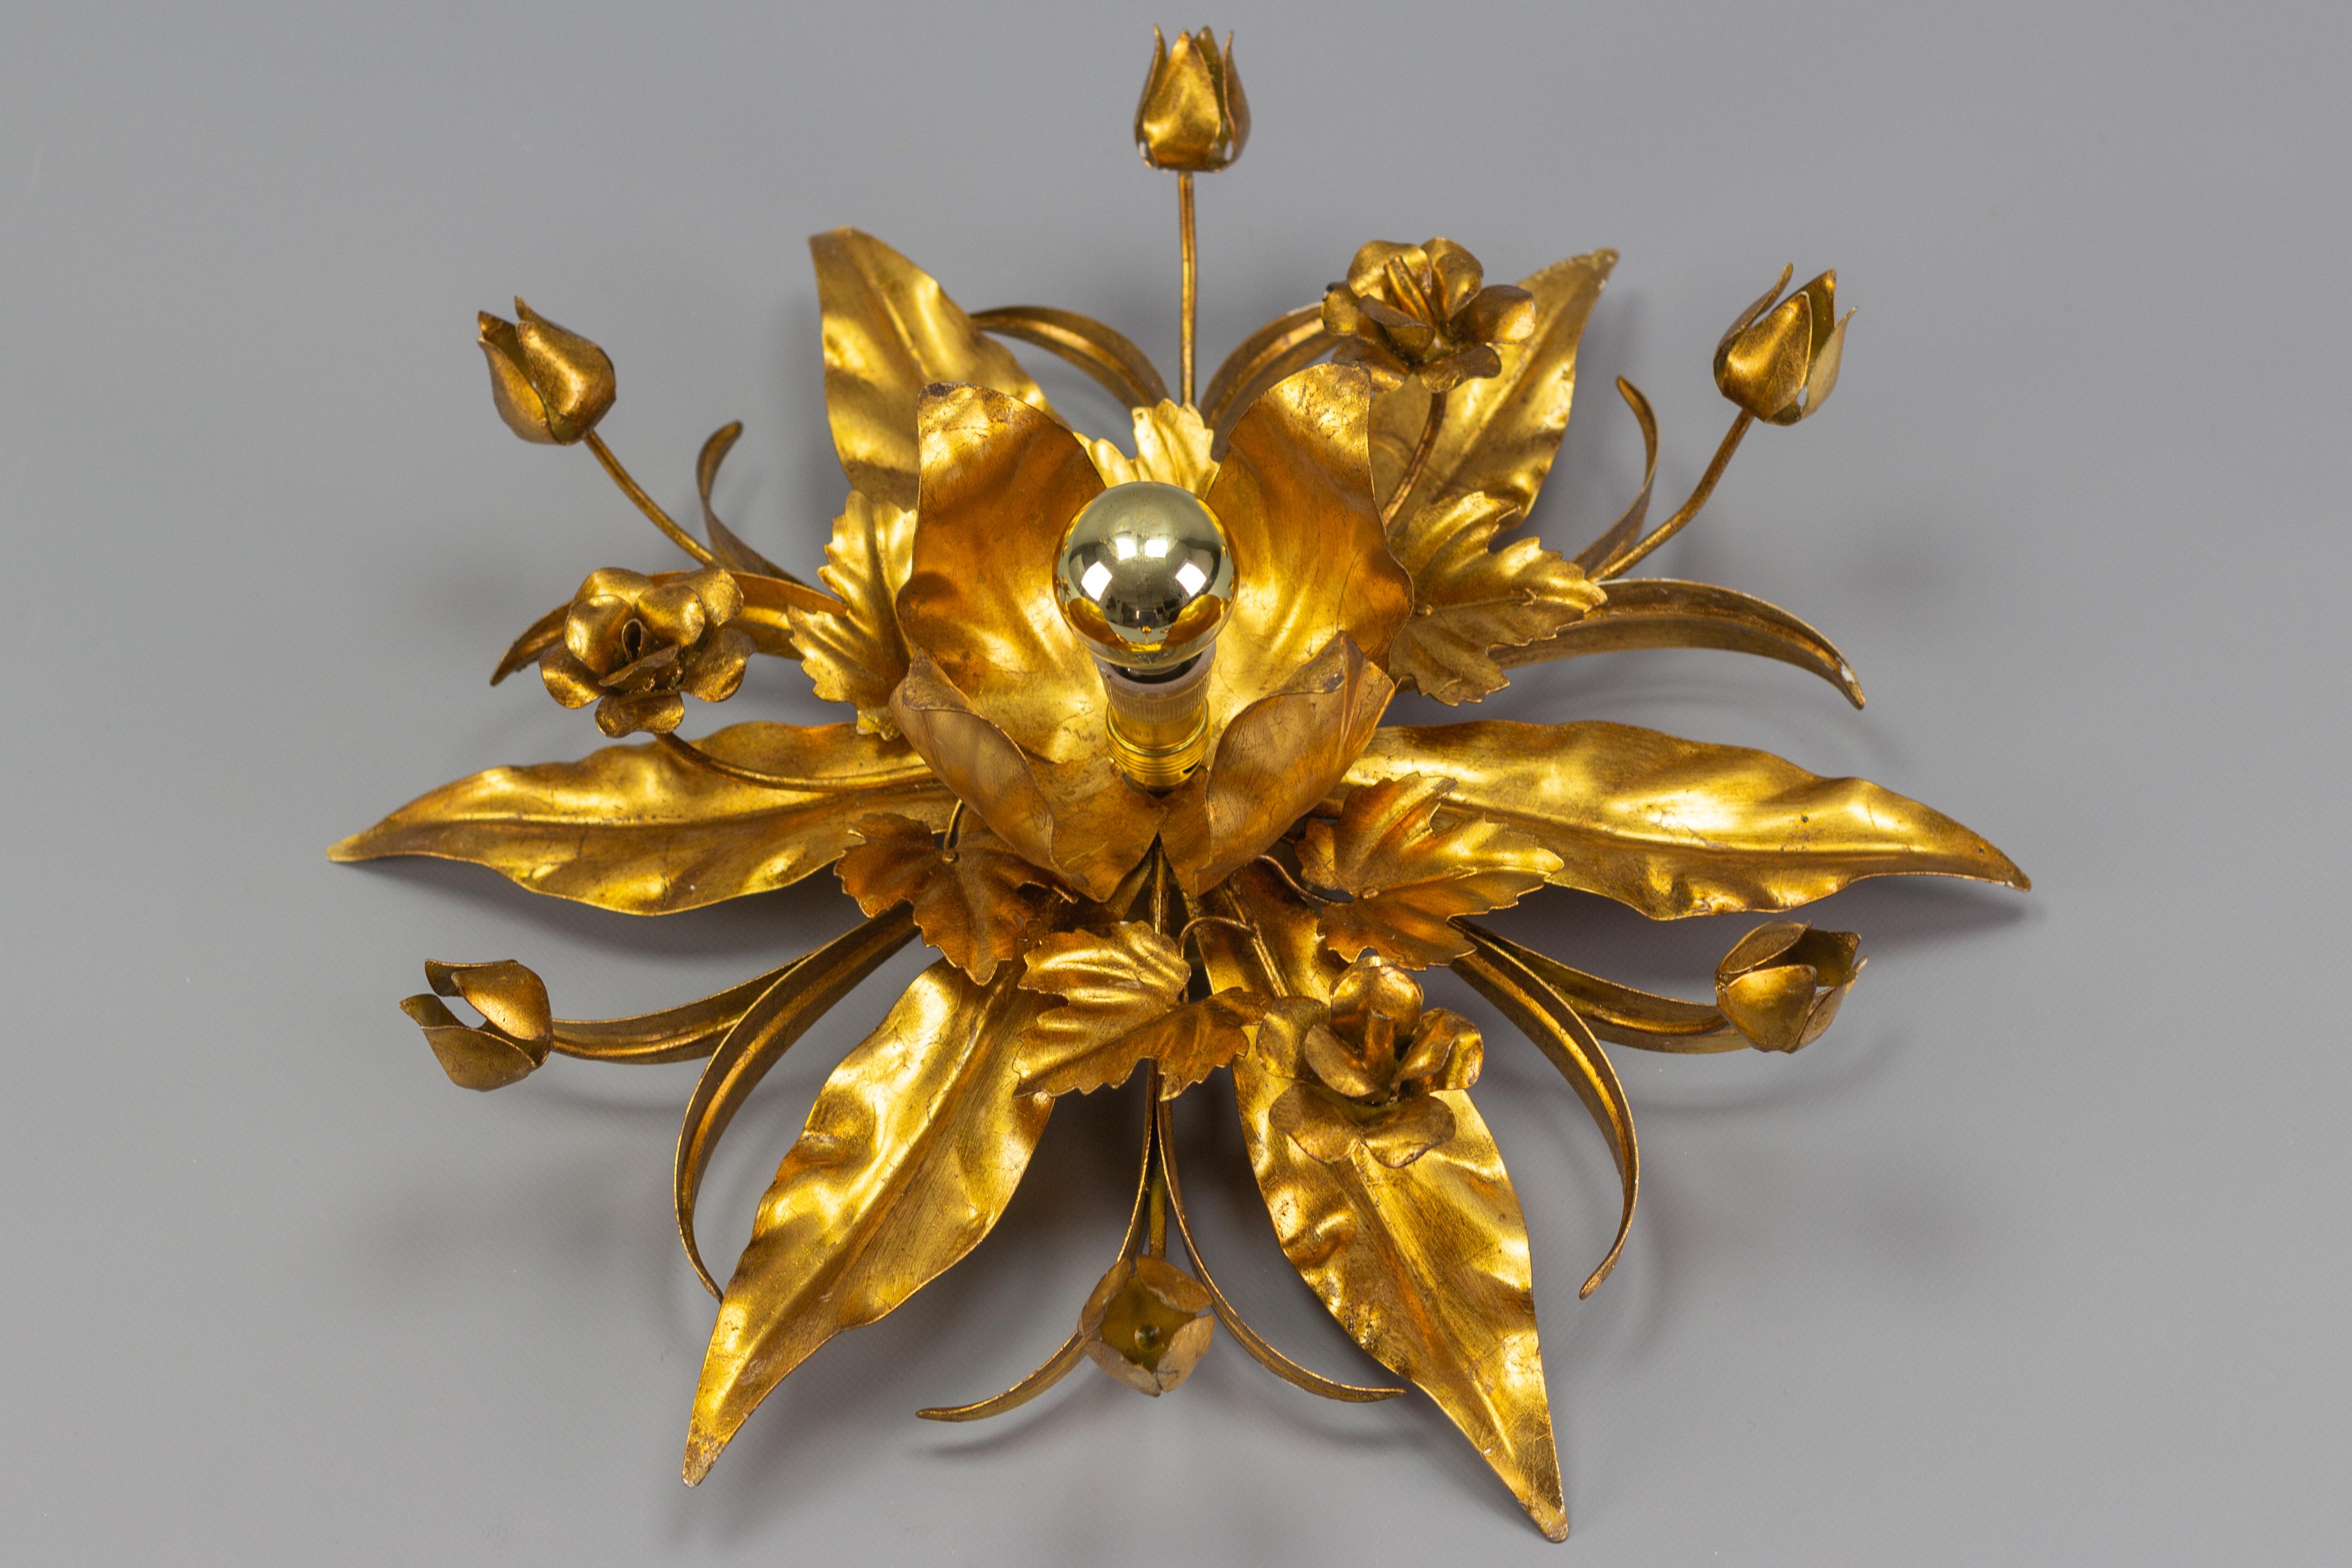 Adorable Hollywood Regency style gilt metal flower-shaped flush mount or wall light, adorned with beautifully shaped leaves, flowers, and buds.
One socket for an E14 size light bulb.
Dimensions: height: circa 14 cm / 5.51 in; diameter: 42 cm /